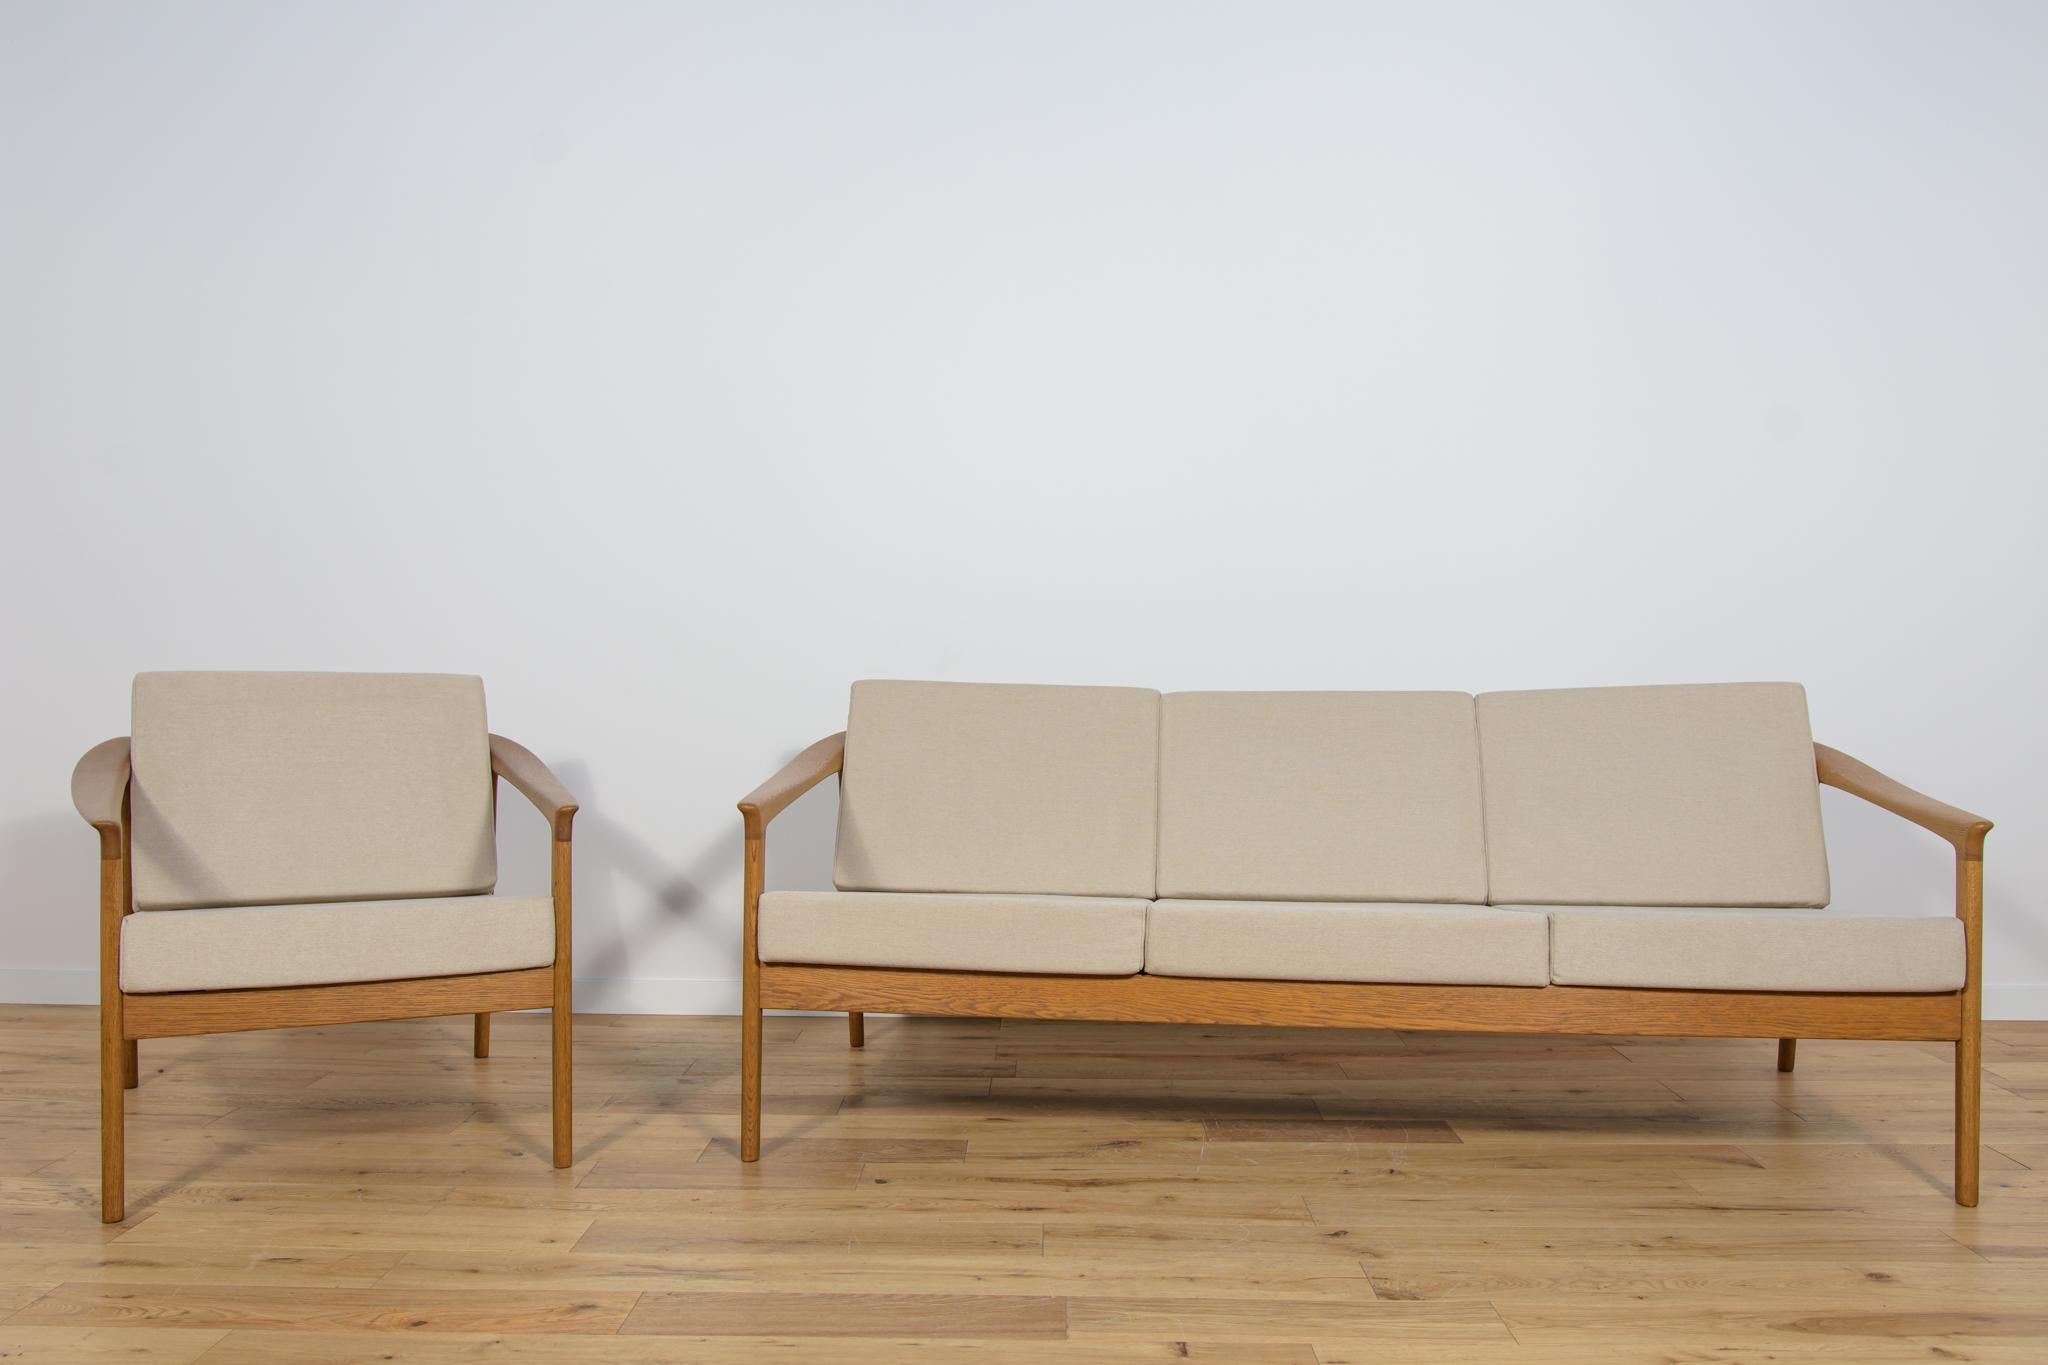 Monterey /5-161 Sofa and Armchair designed by Folke Ohlsson, produced by the Swedish manufacturer Bodafors in 1961. Sofa and Armchair has profiled armrests, representing high craftsmanship, characteristic of Scandinavian design. The structure of the